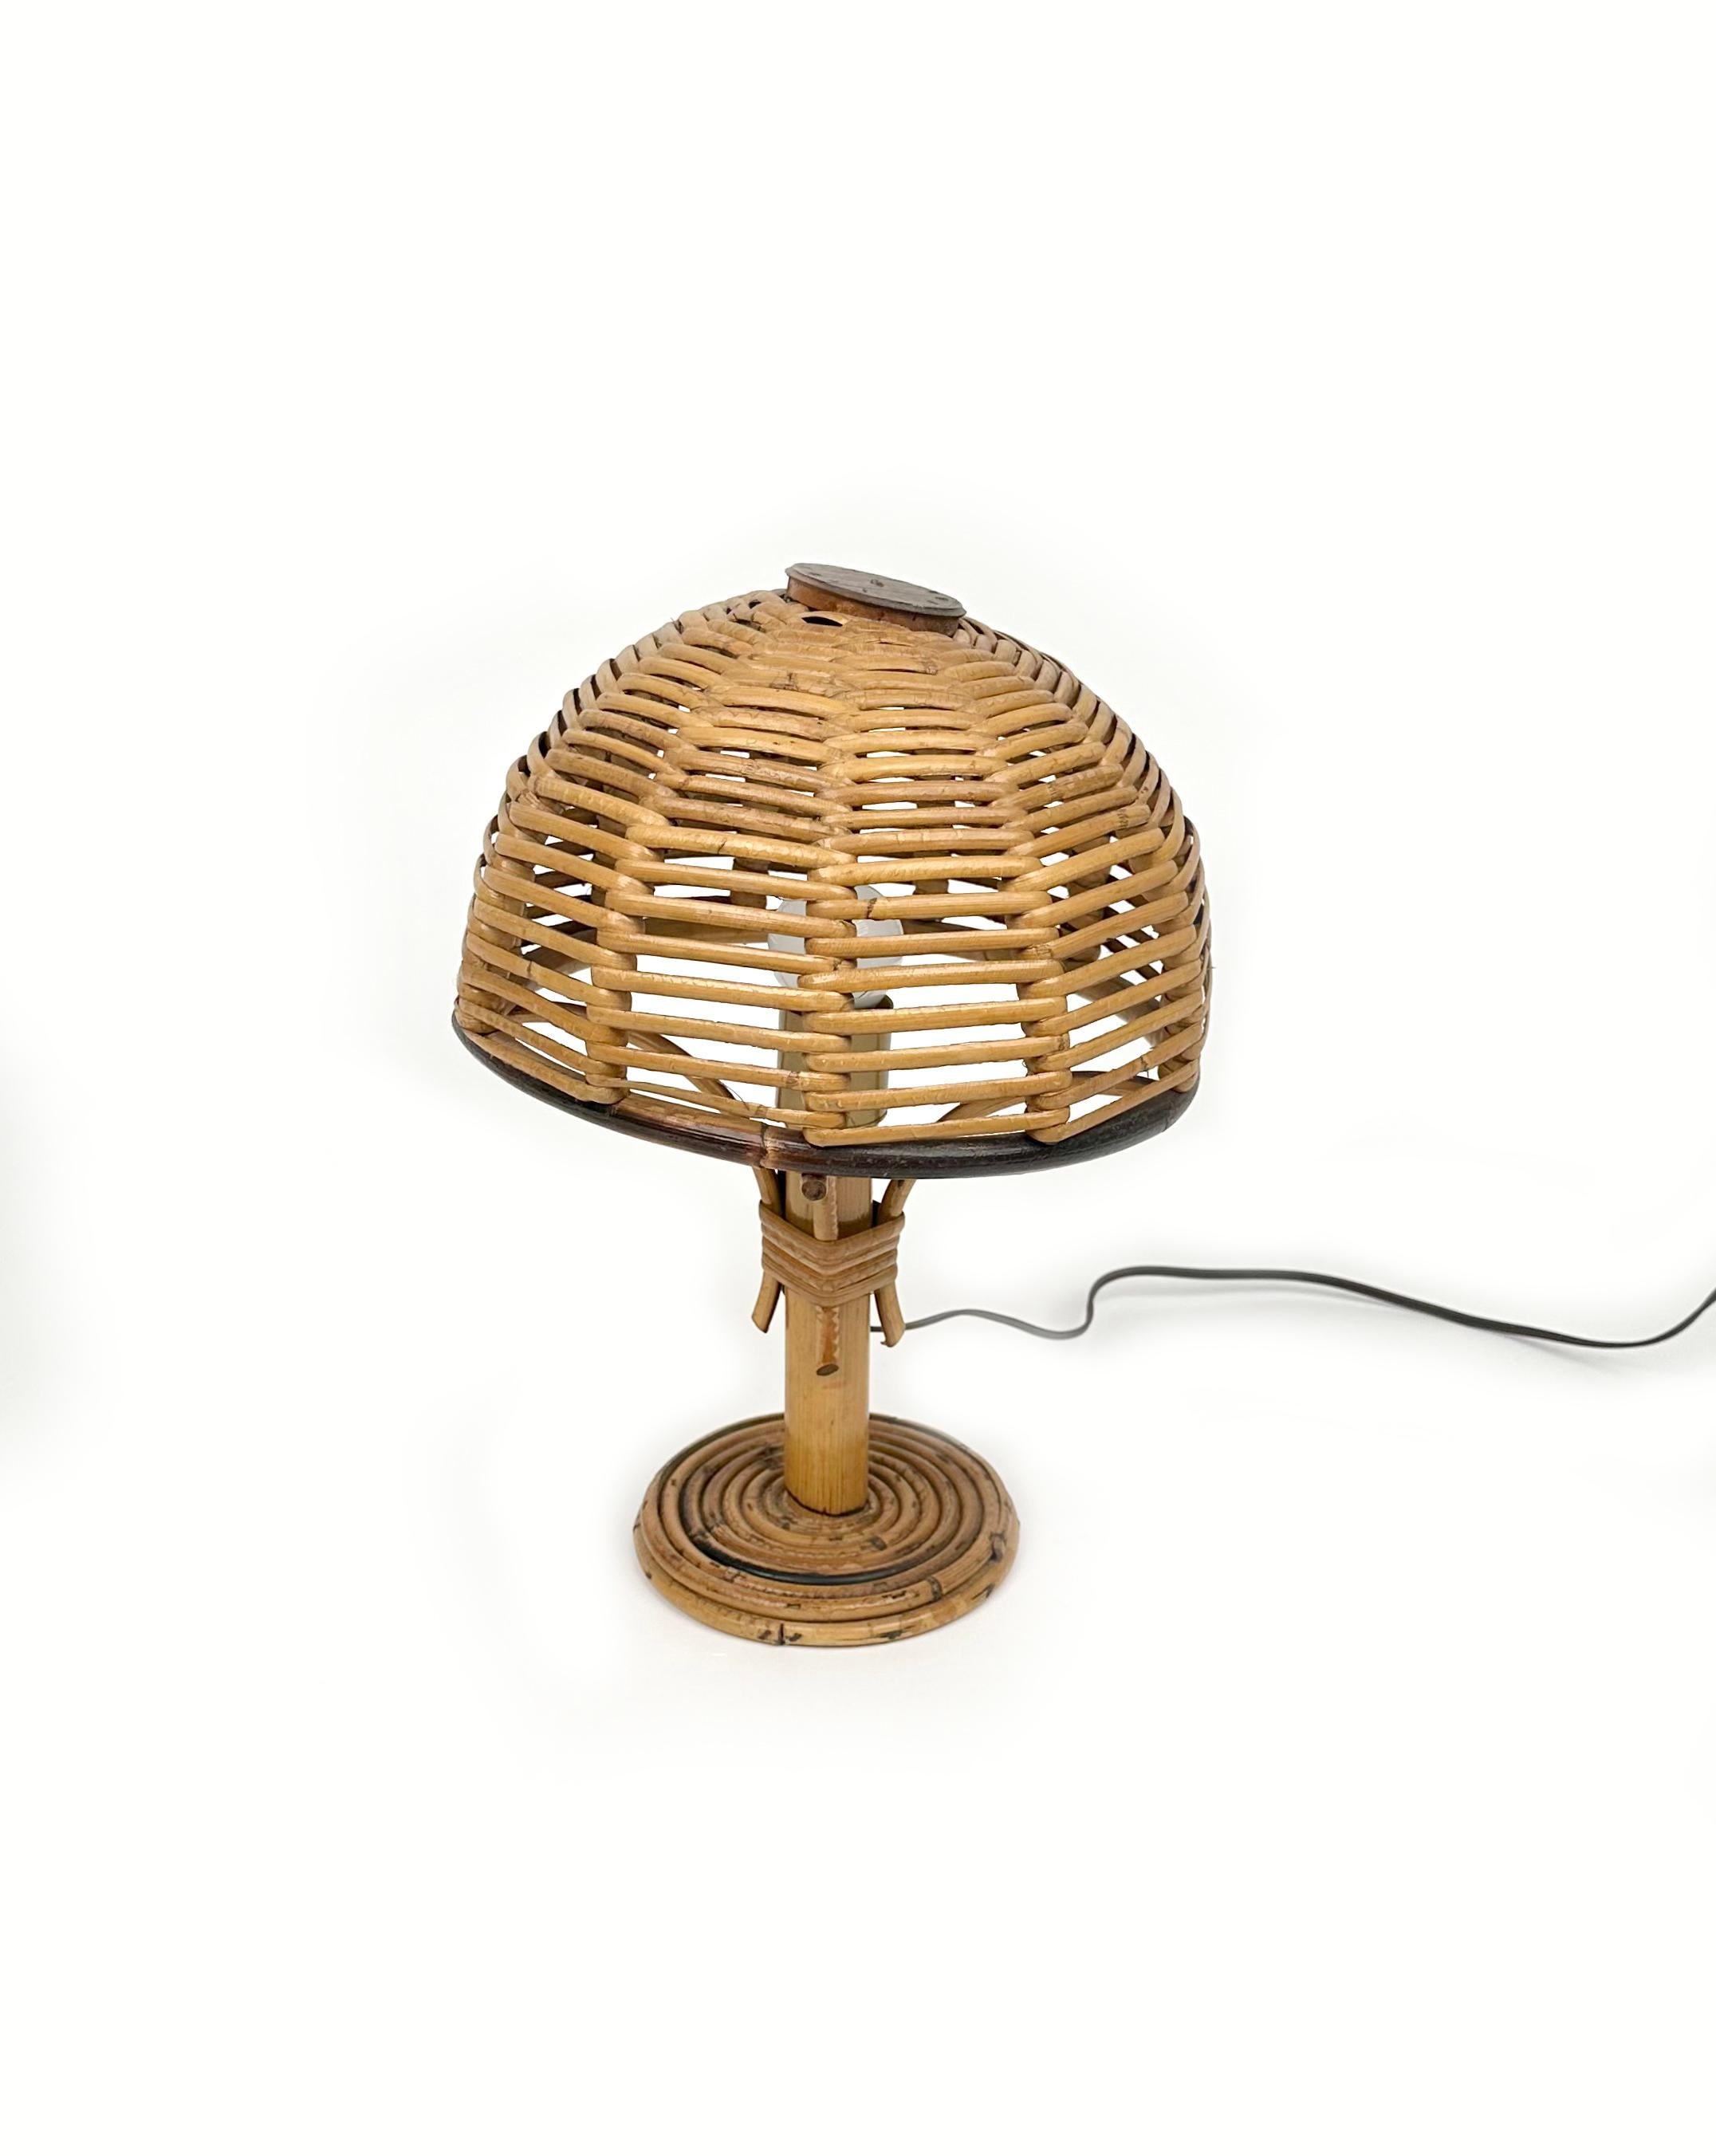 Midcentury Bamboo and Rattan Pair of Table Lamps Louis Sognot Style, Italy 1960s For Sale 1